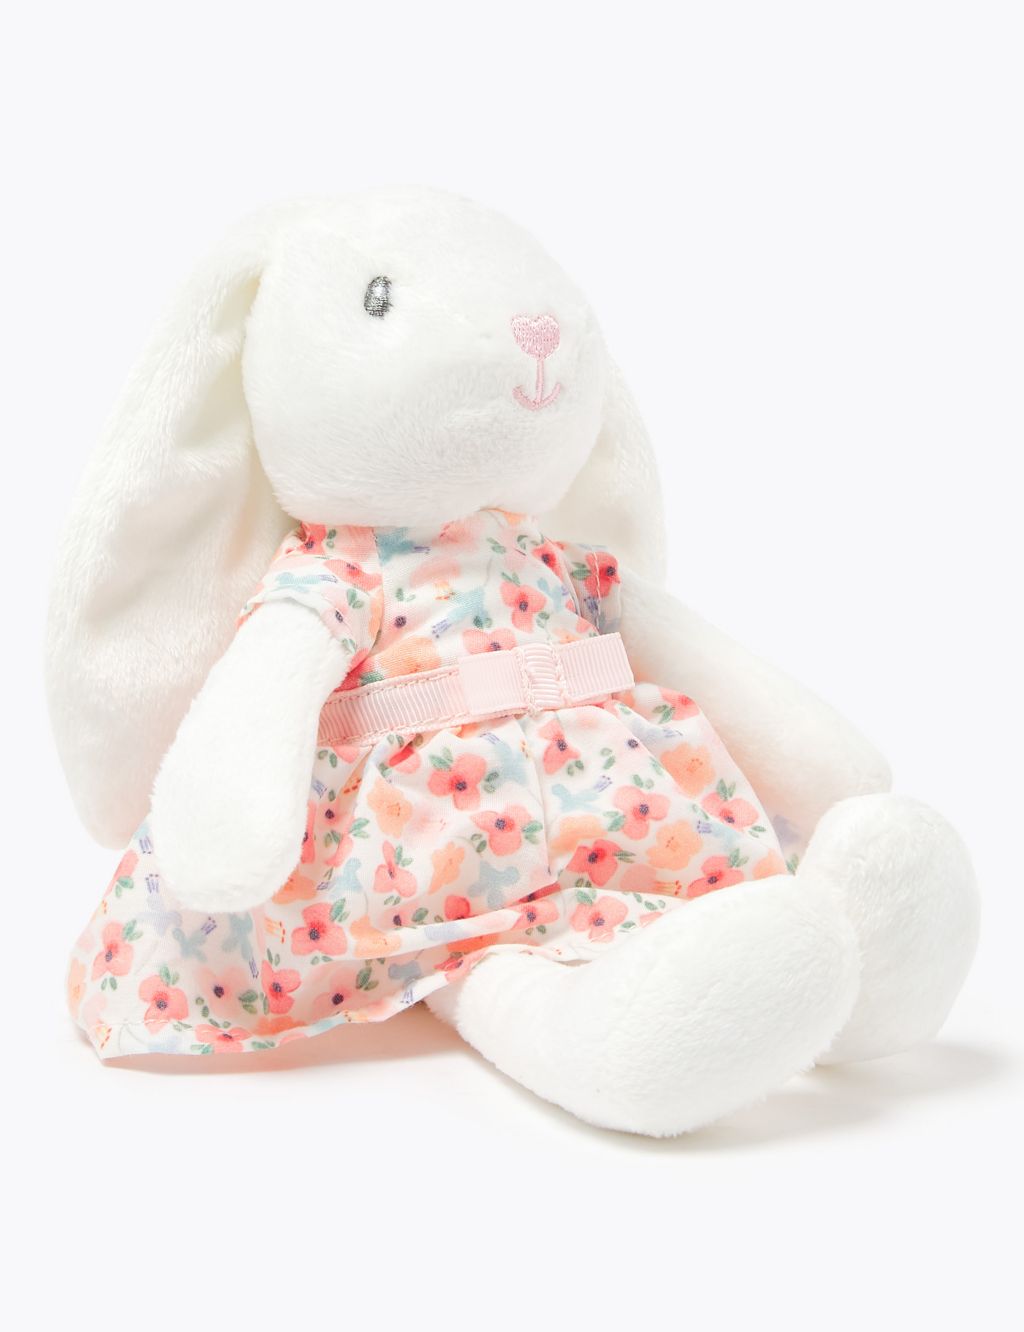 Bunny in a Dress Soft Toy image 3